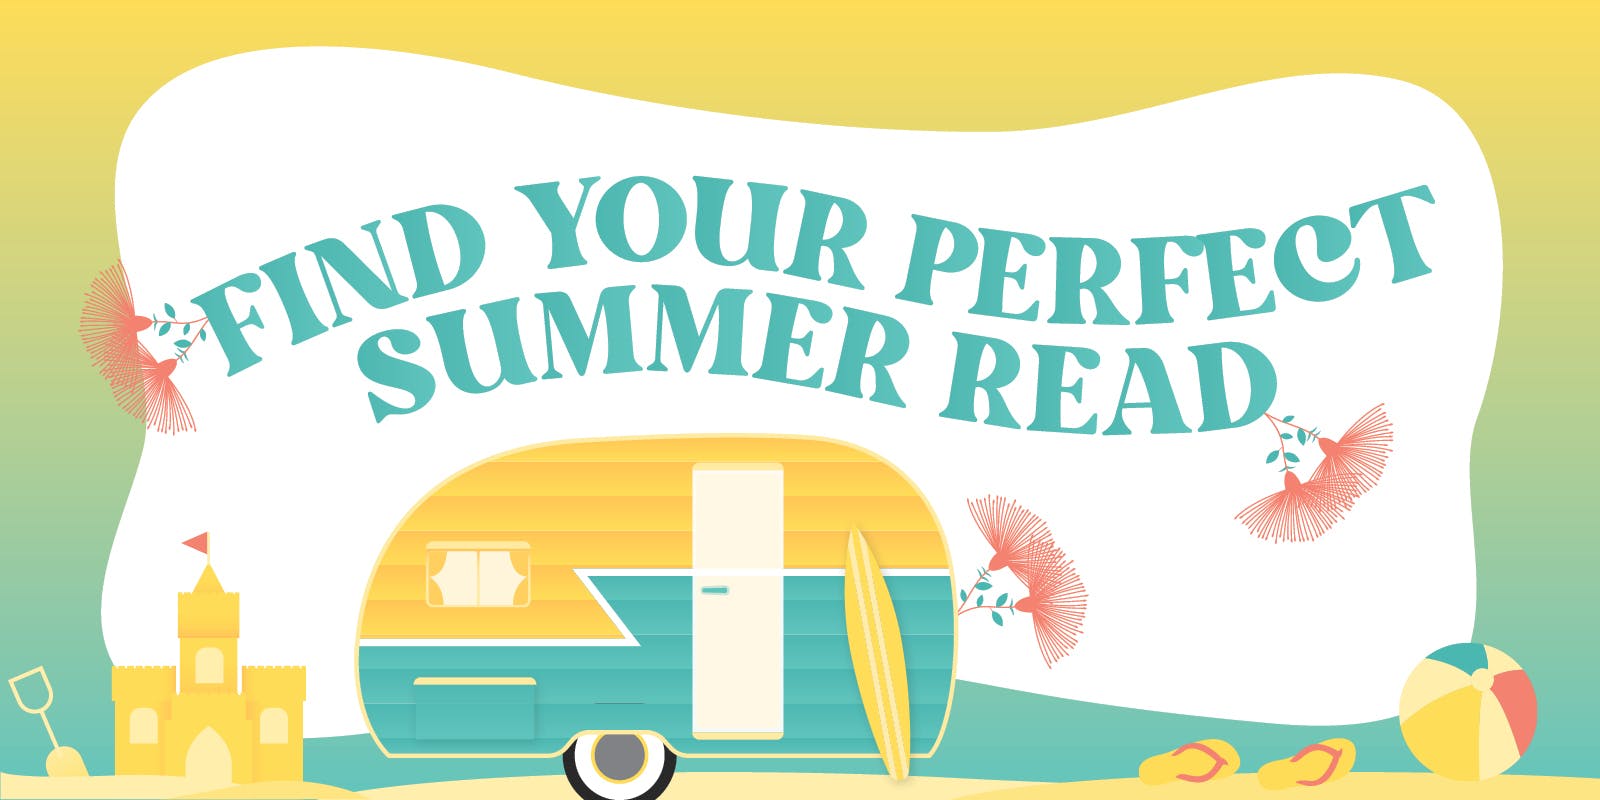 Find your perfect summer read!